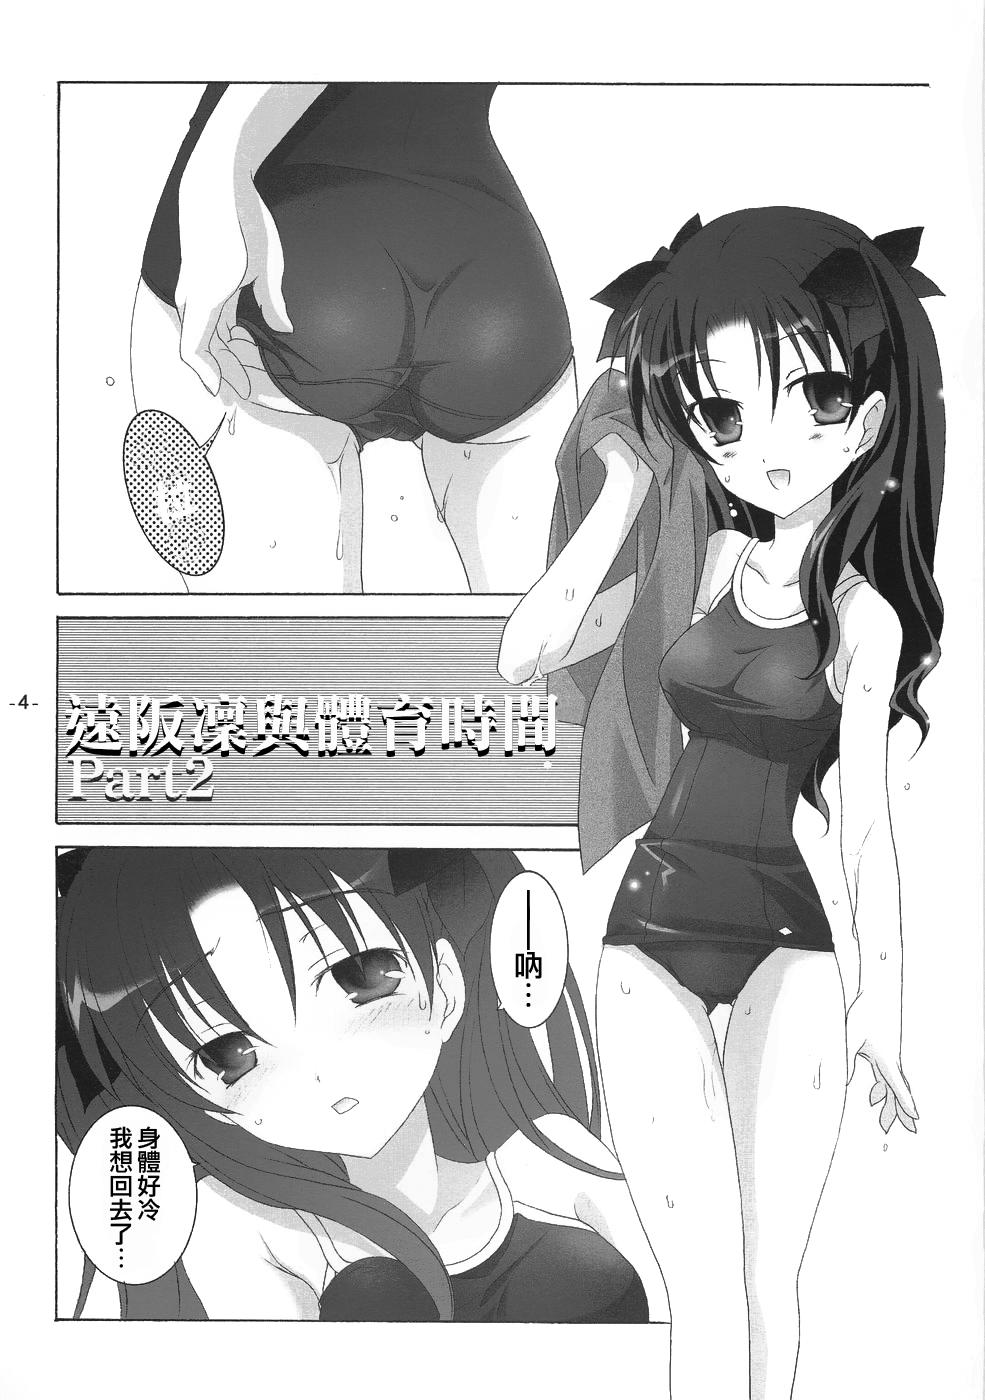 Buttplug Another Girl II - Fate stay night Virtual - Page 3